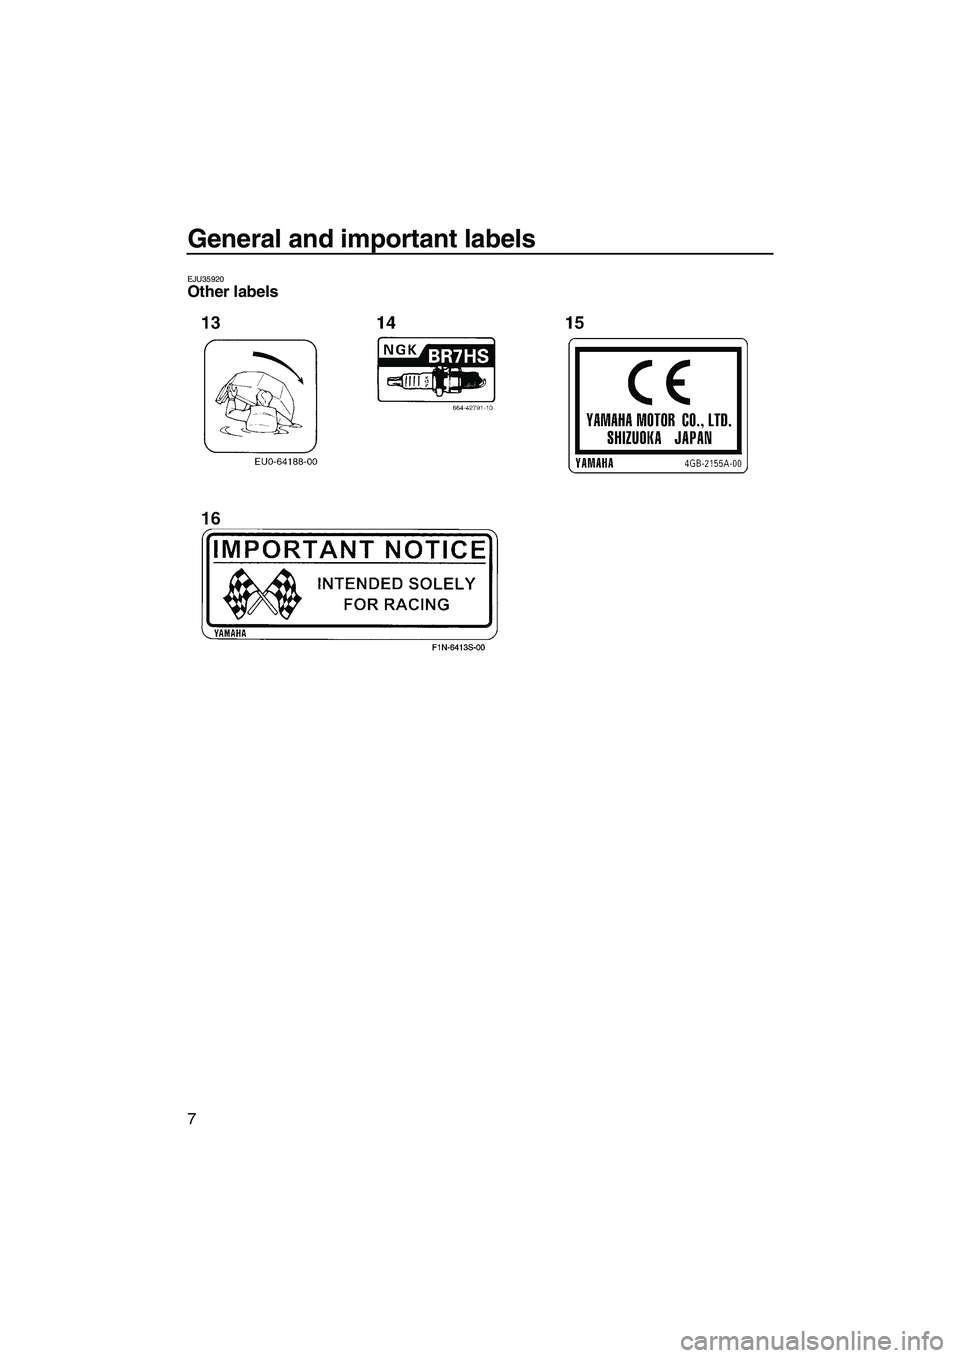 YAMAHA SUPERJET 2007 User Guide General and important labels
7
EJU35920Other labels 
UF1N75E0.book  Page 7  Tuesday, May 16, 2006  9:53 AM 